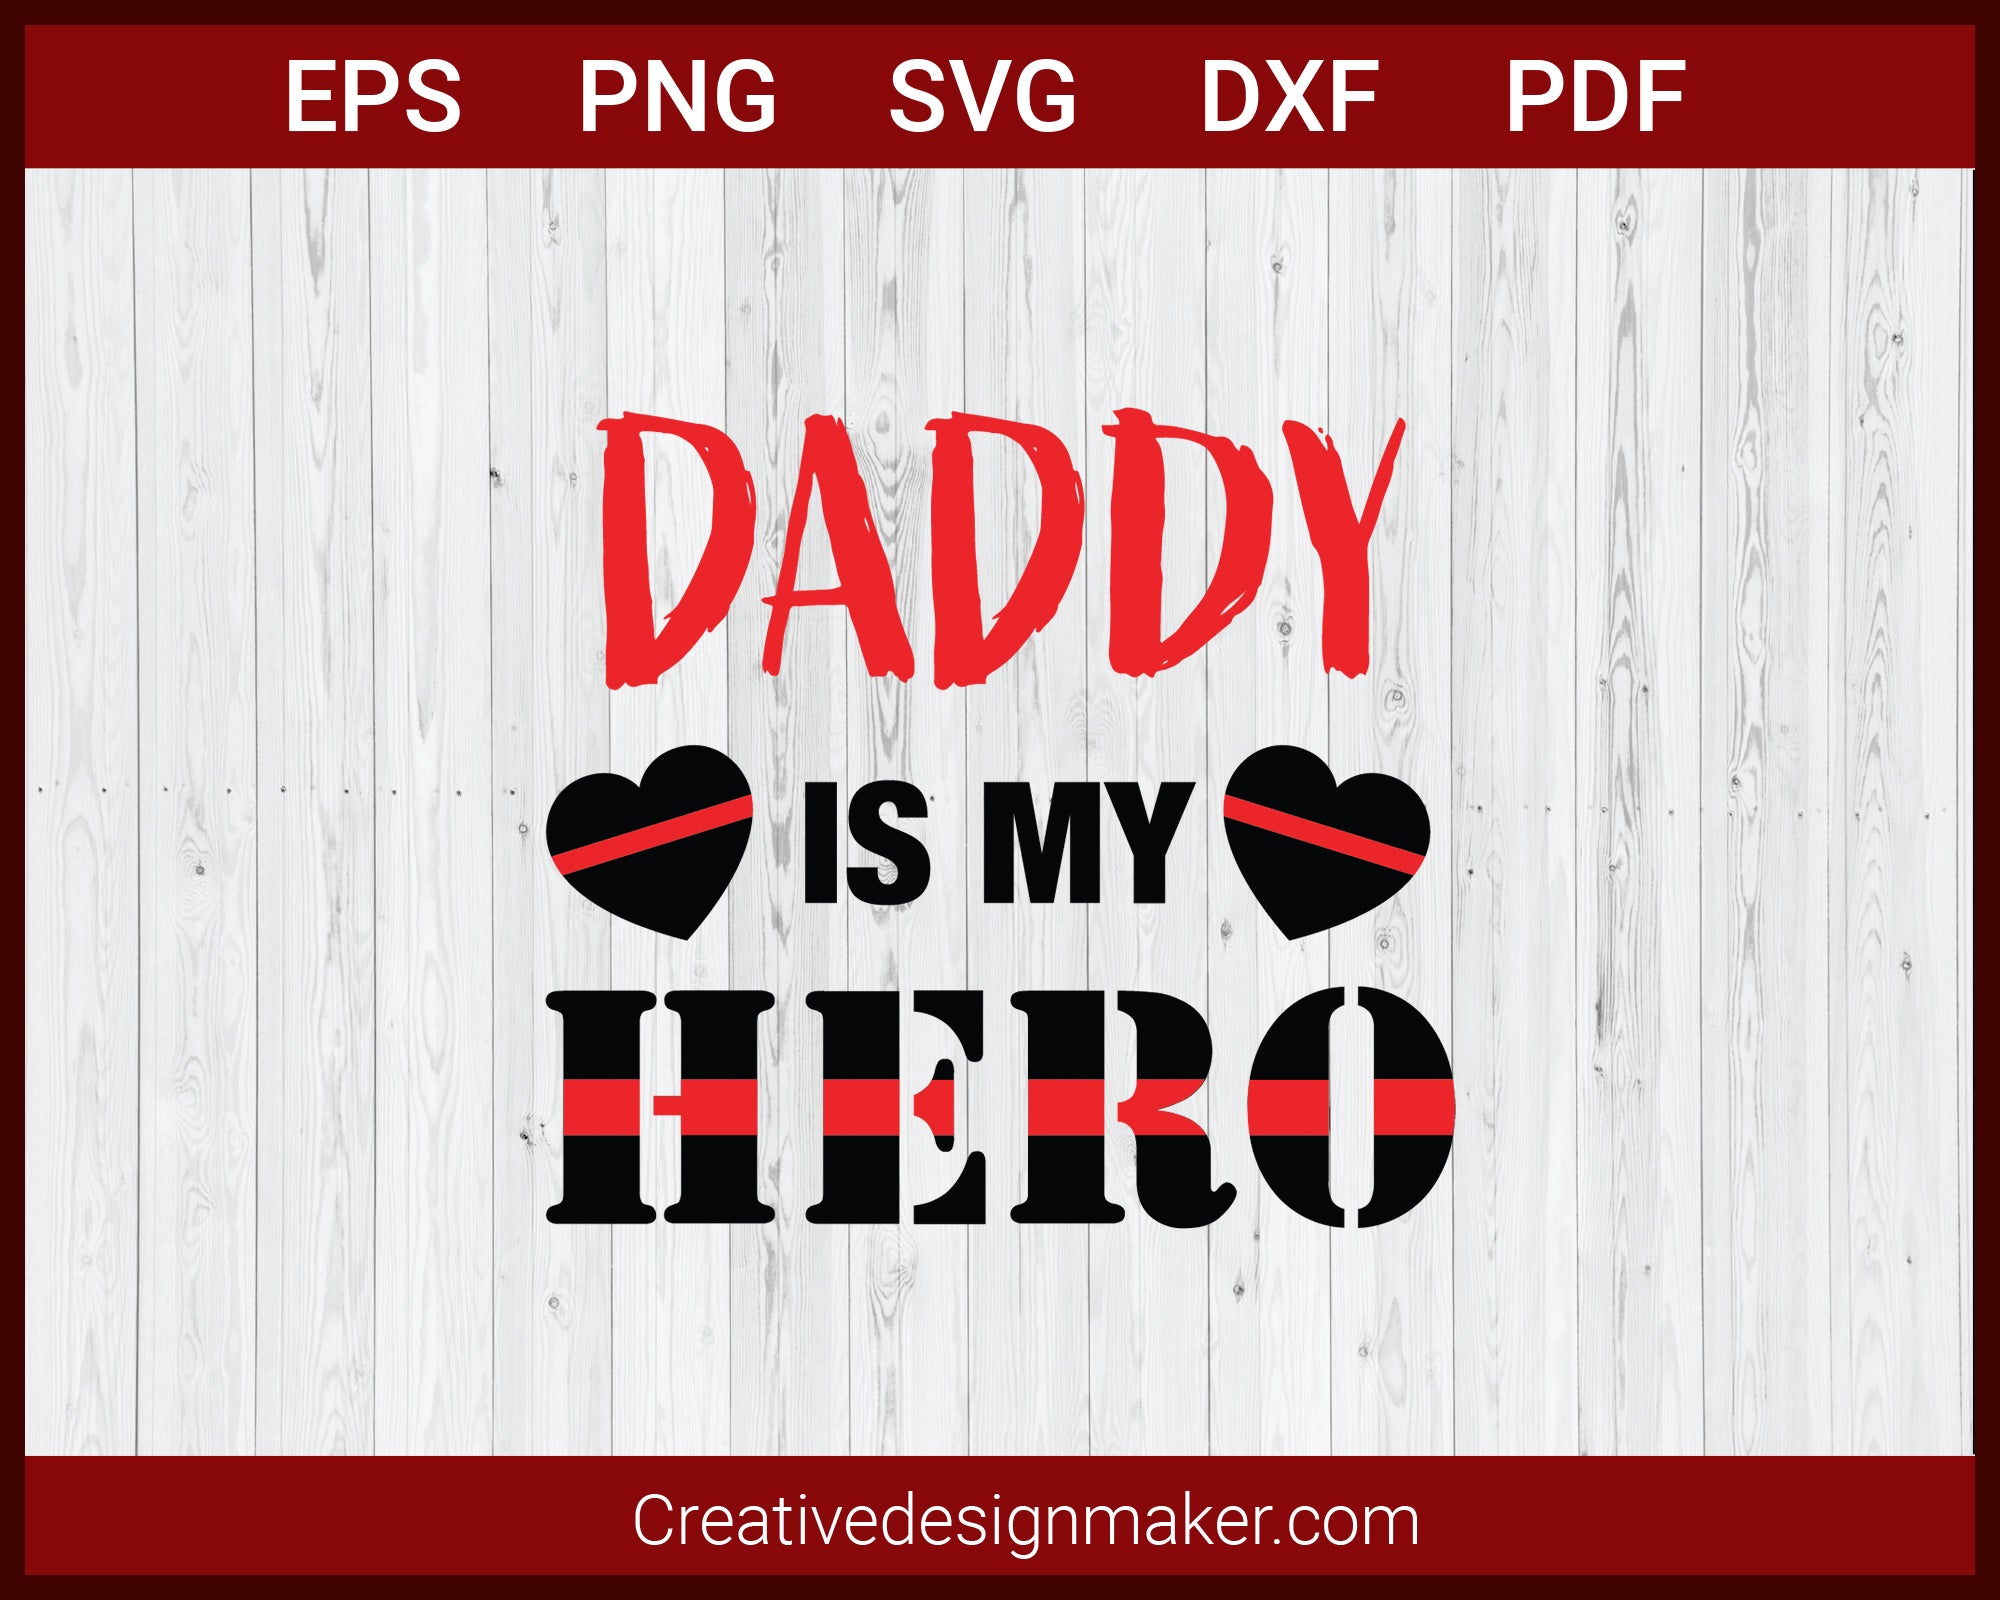 Daddy Is My Hero Fire Dept Red Line SVG Cricut Silhouette DXF PNG EPS Cut File